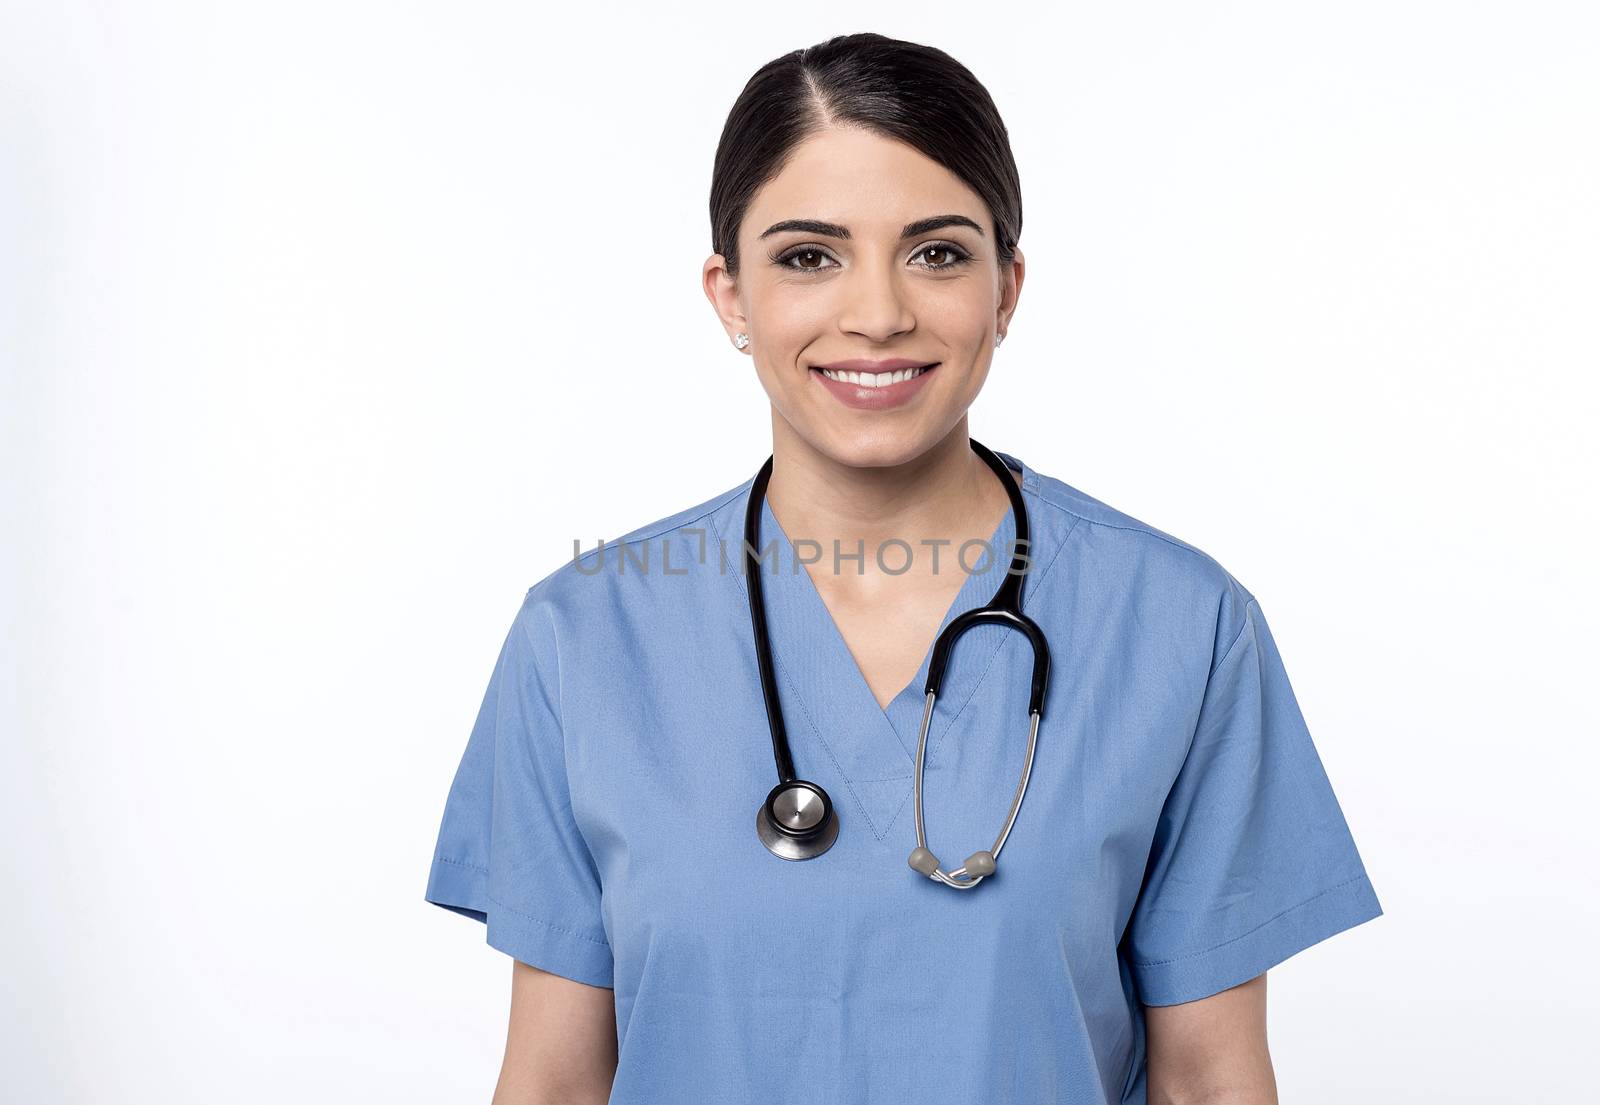 Confident pose of female doctor over white